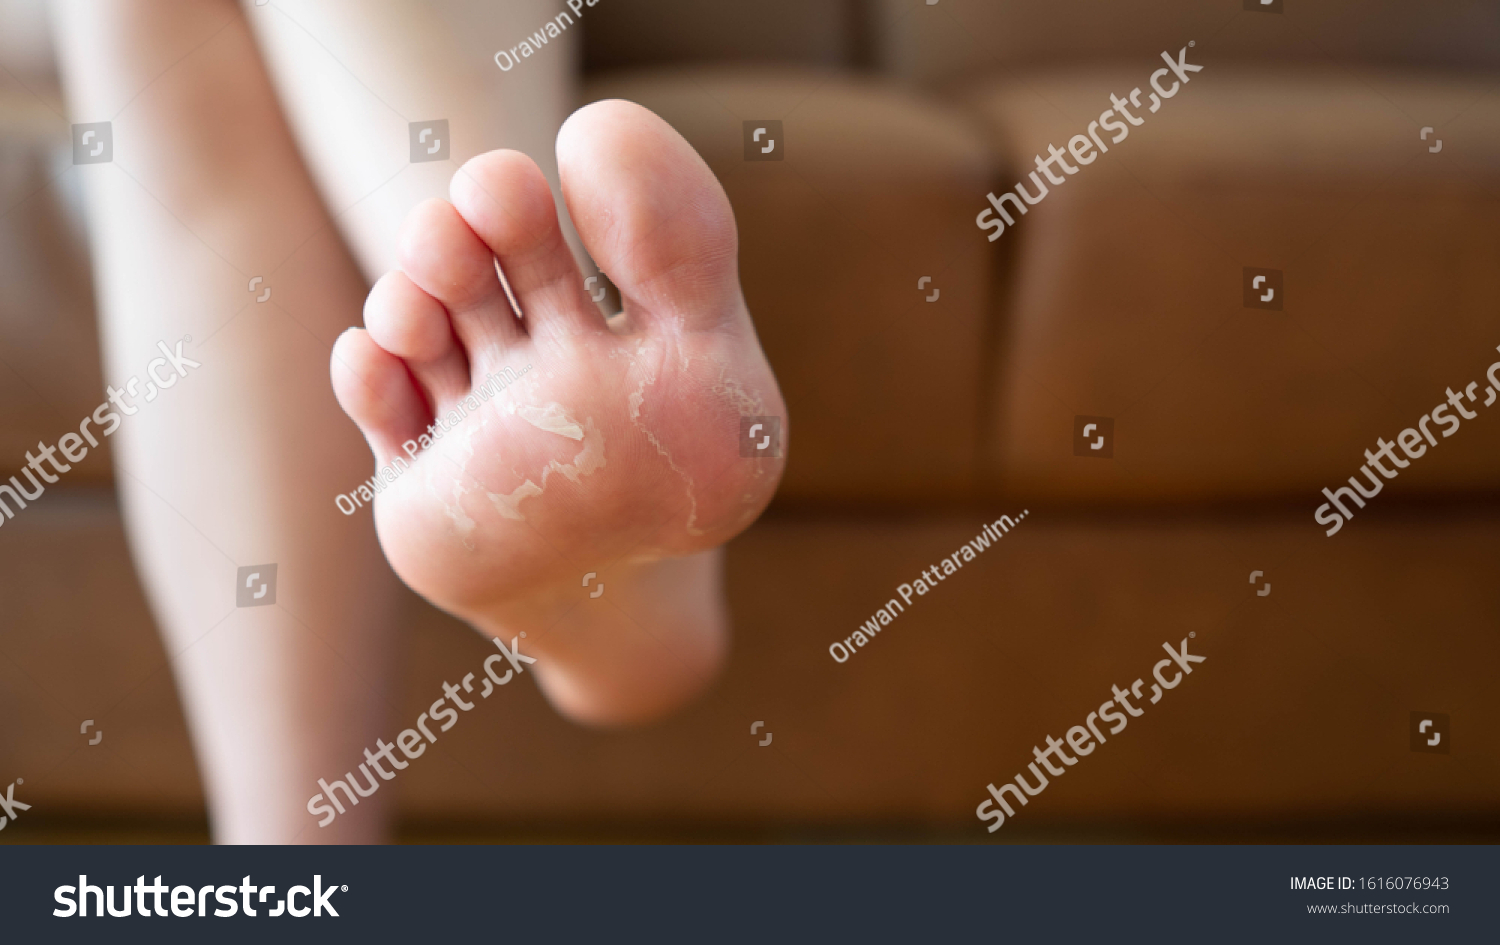 Close up of peeling and cracked foot. Causes of peeling foot included fungal infection (athlete's foot), dermatitis (eczema), sunburn, dry skin, dehydration or sweaty feet. Health care concept. #1616076943